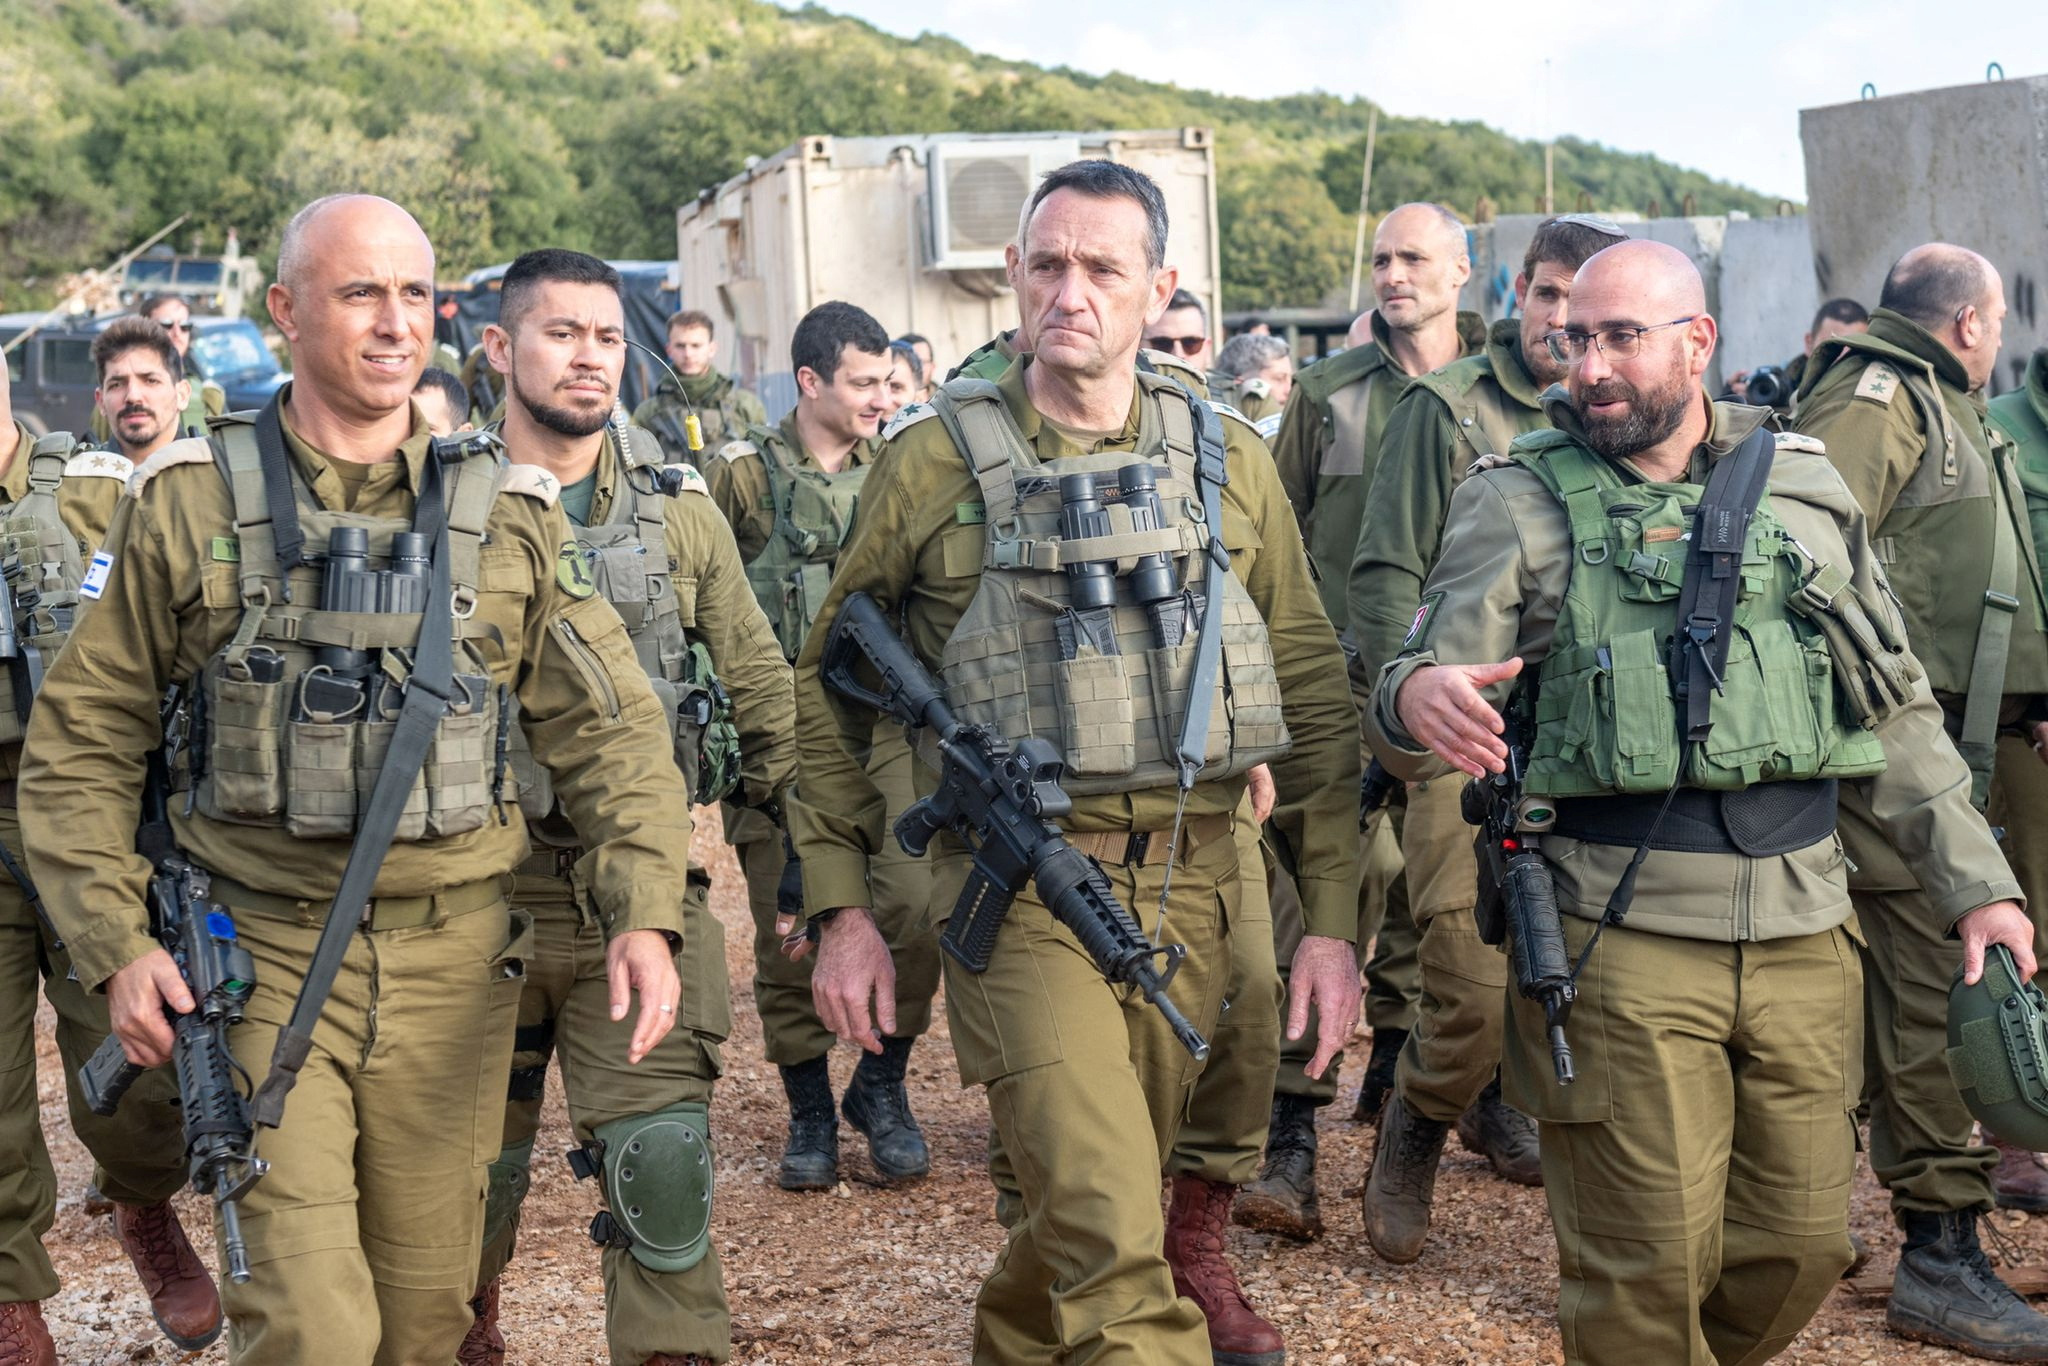 Israeli military Chief of General Staff Herzi Halevi walks with Israeli military soldiers, at a location given as northern Israel. /Reuters via third party